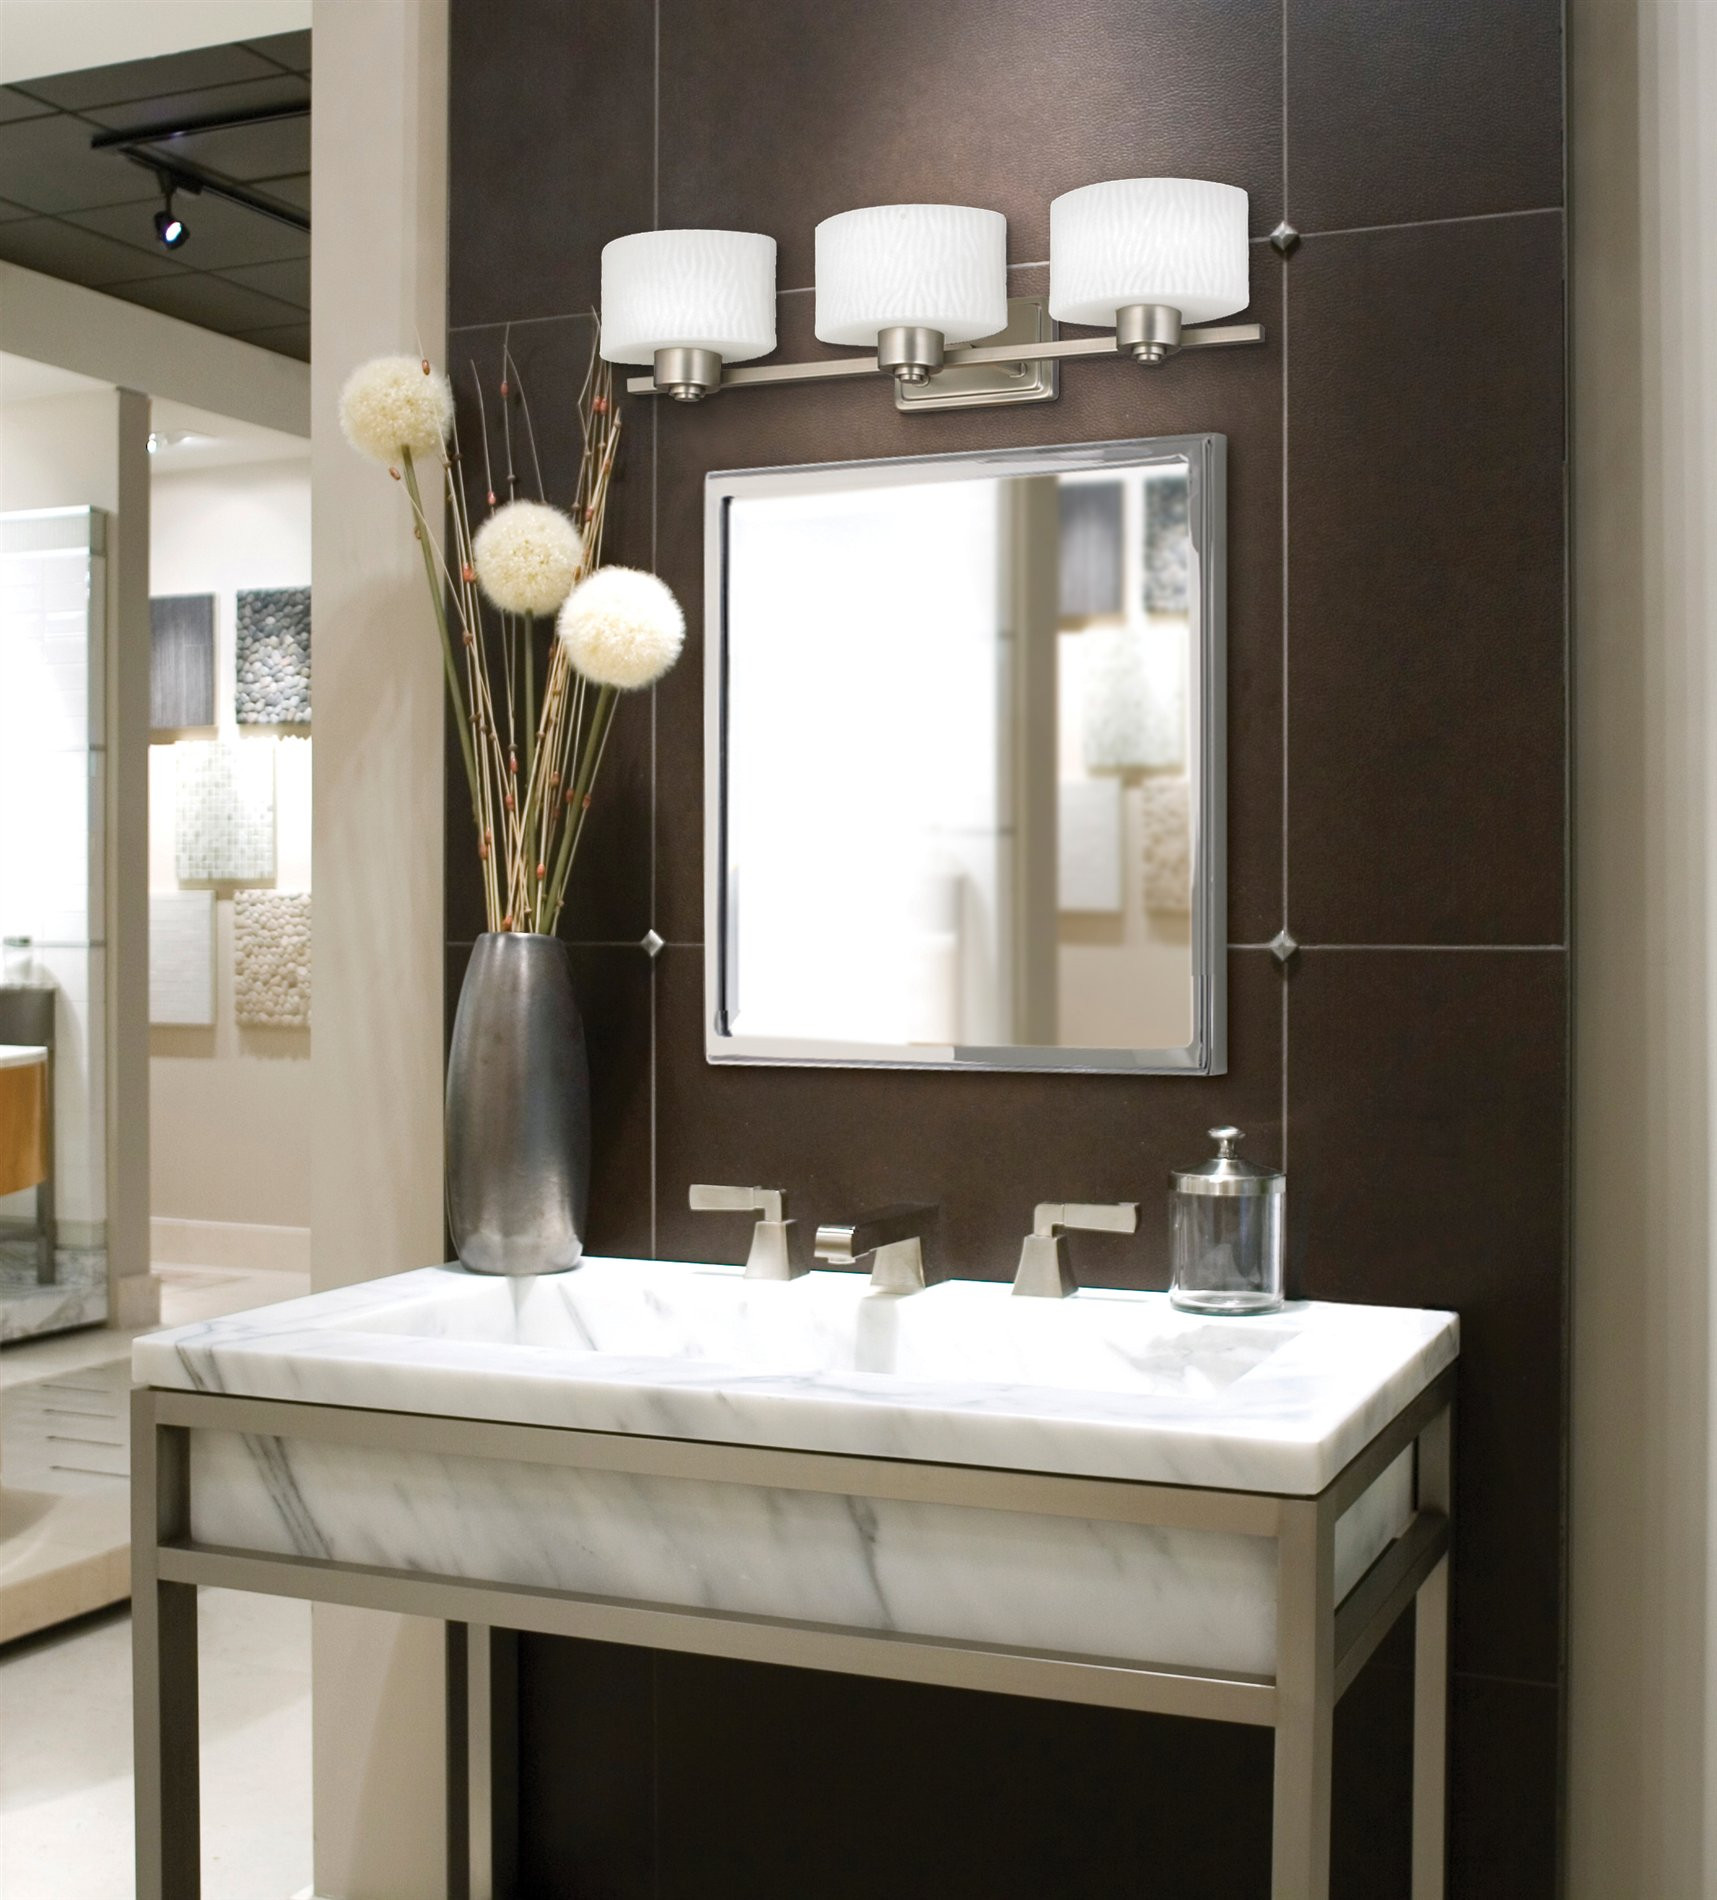 Bathroom Vanity Mirror
 Bathroom Vanity Mirrors for Aesthetics and Functions